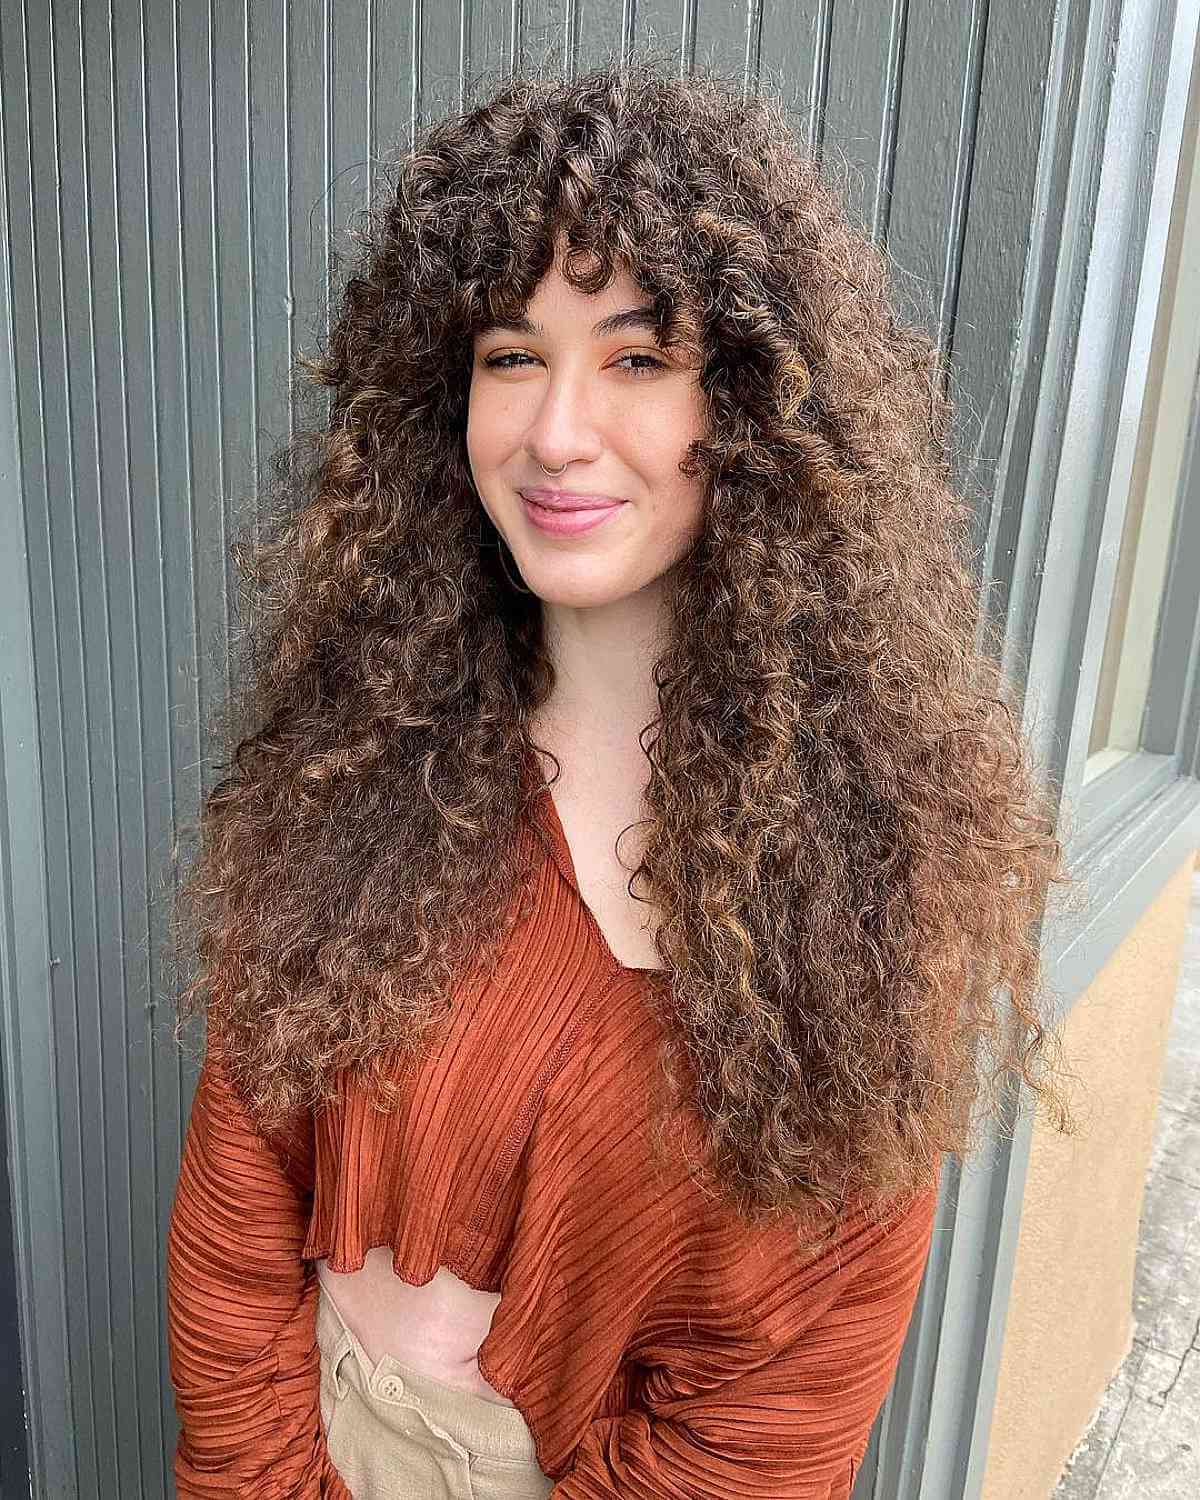 Tight Ringlets with Bangs on Long Shaggy Hair